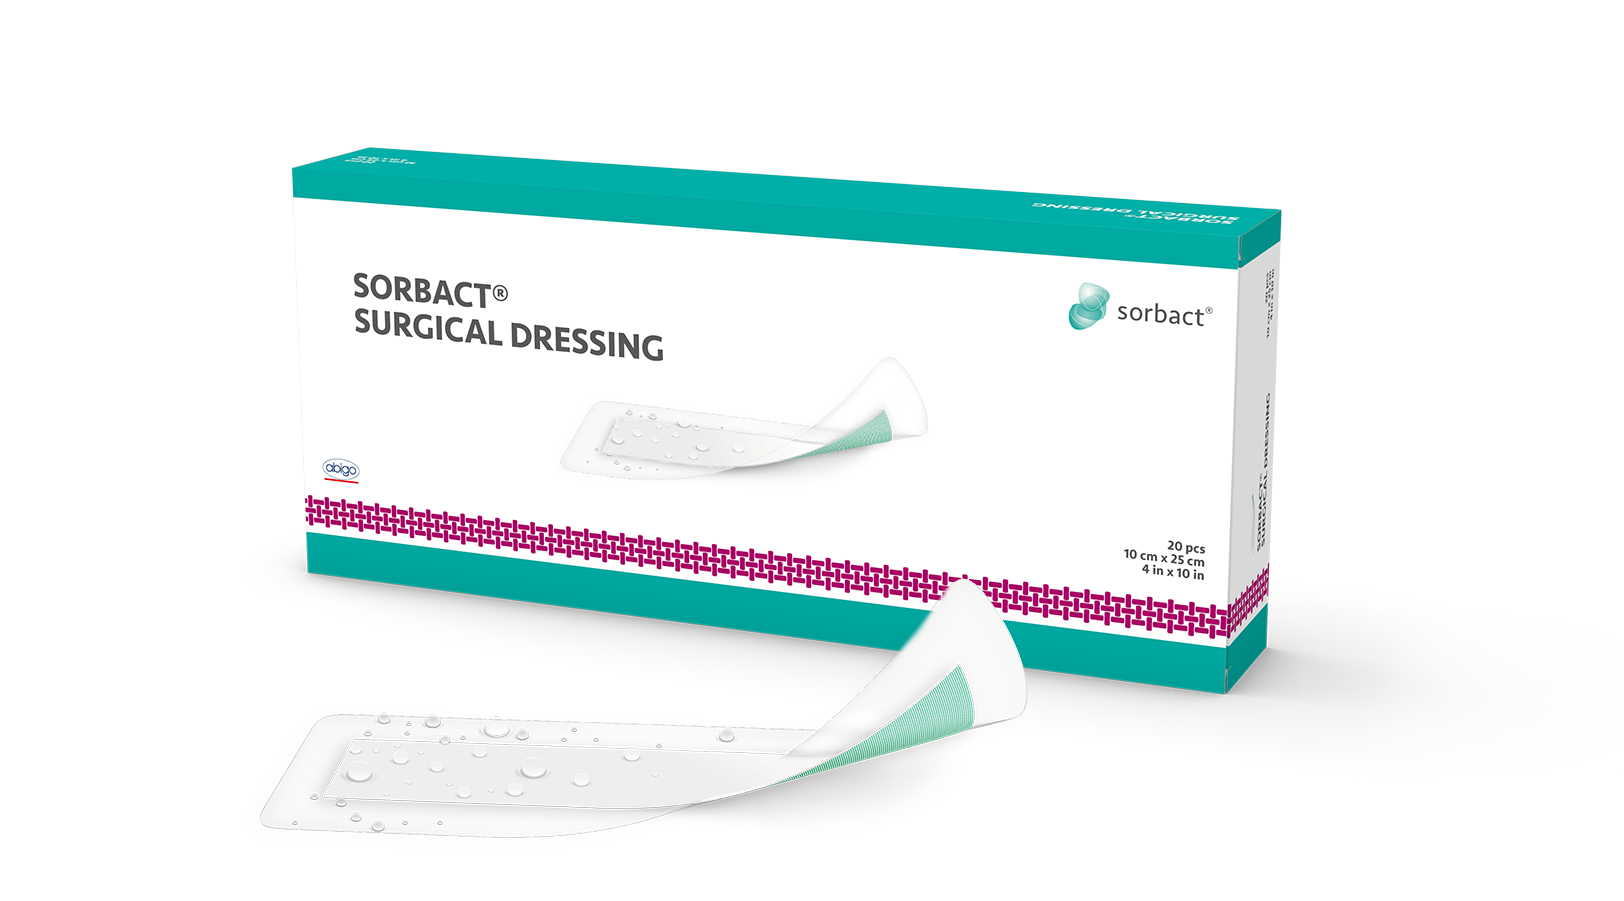 sorbact-surgical-dressing-1624x901-2020